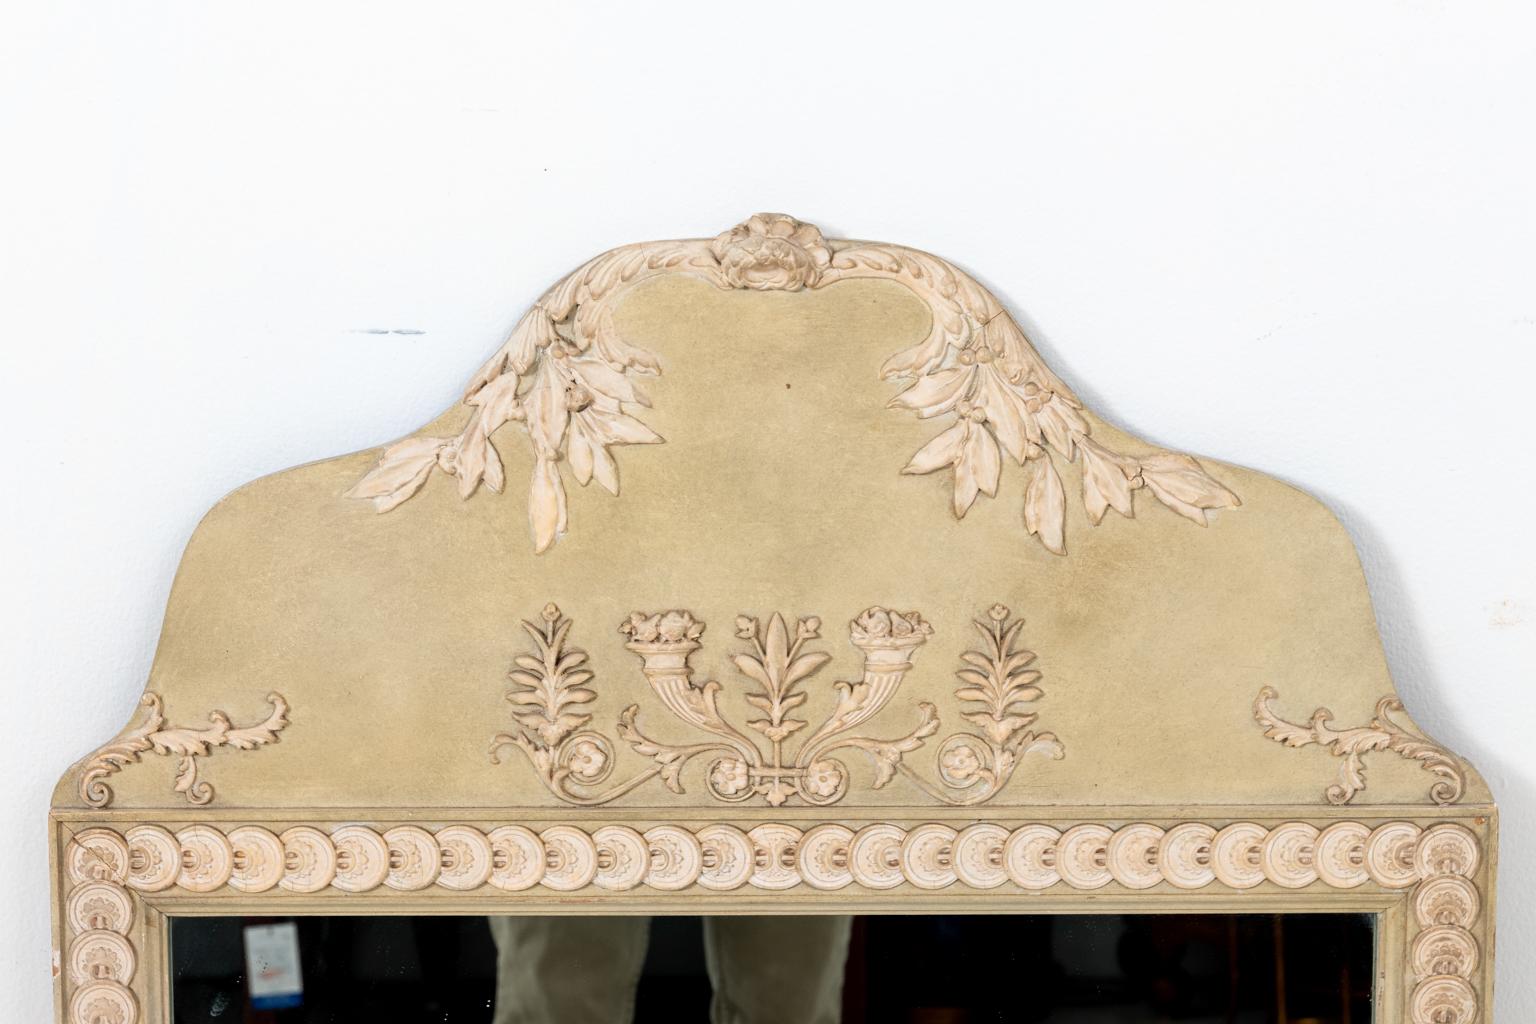 Antique French Louis XV celadon mirror with raised floral cream rosette, circa 1920s. The carved crown also features a raised cornucopia motif. Please note of wear consistent with age including minor paint loss. Made in France.